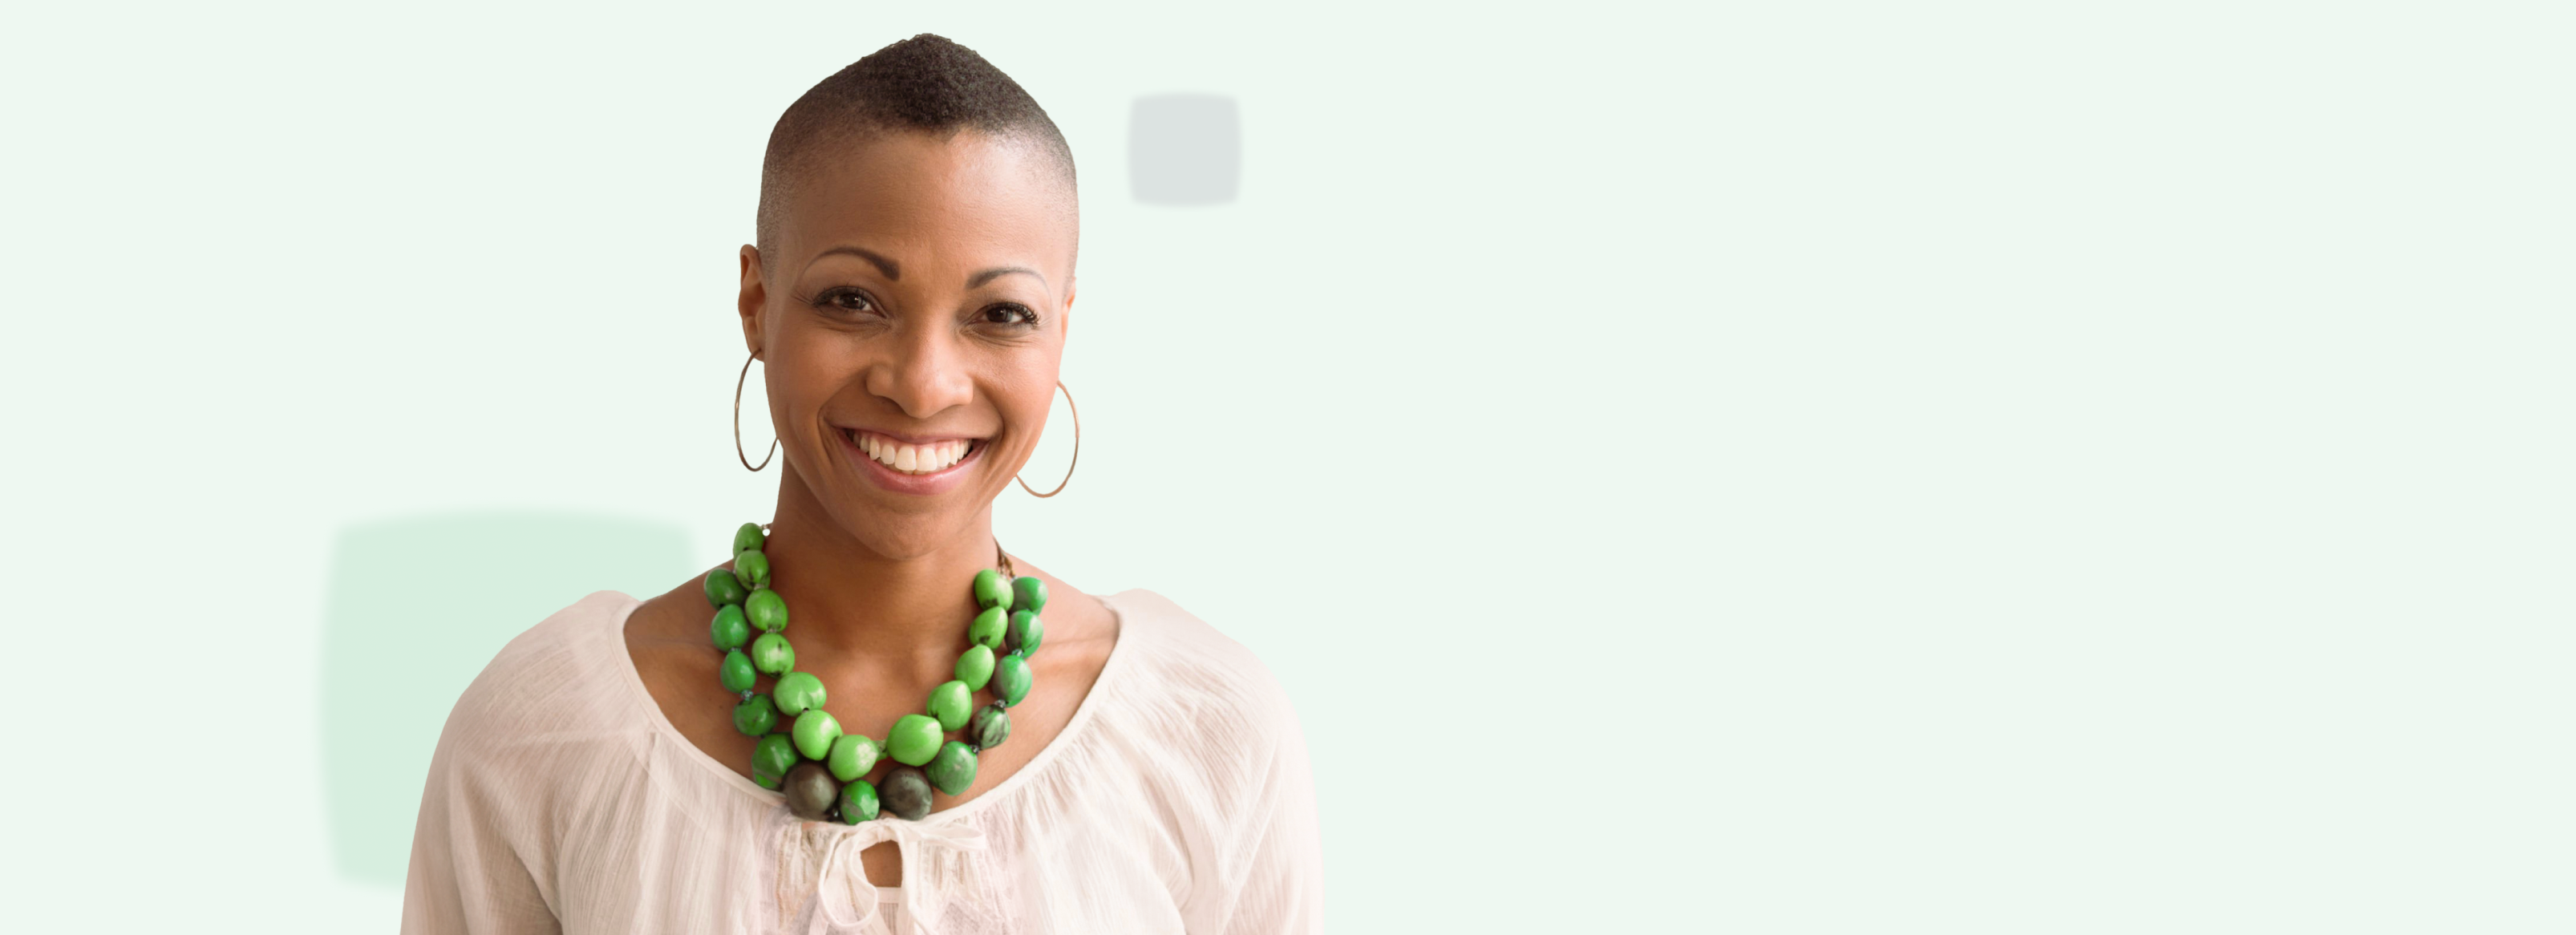 smiling woman with green necklace